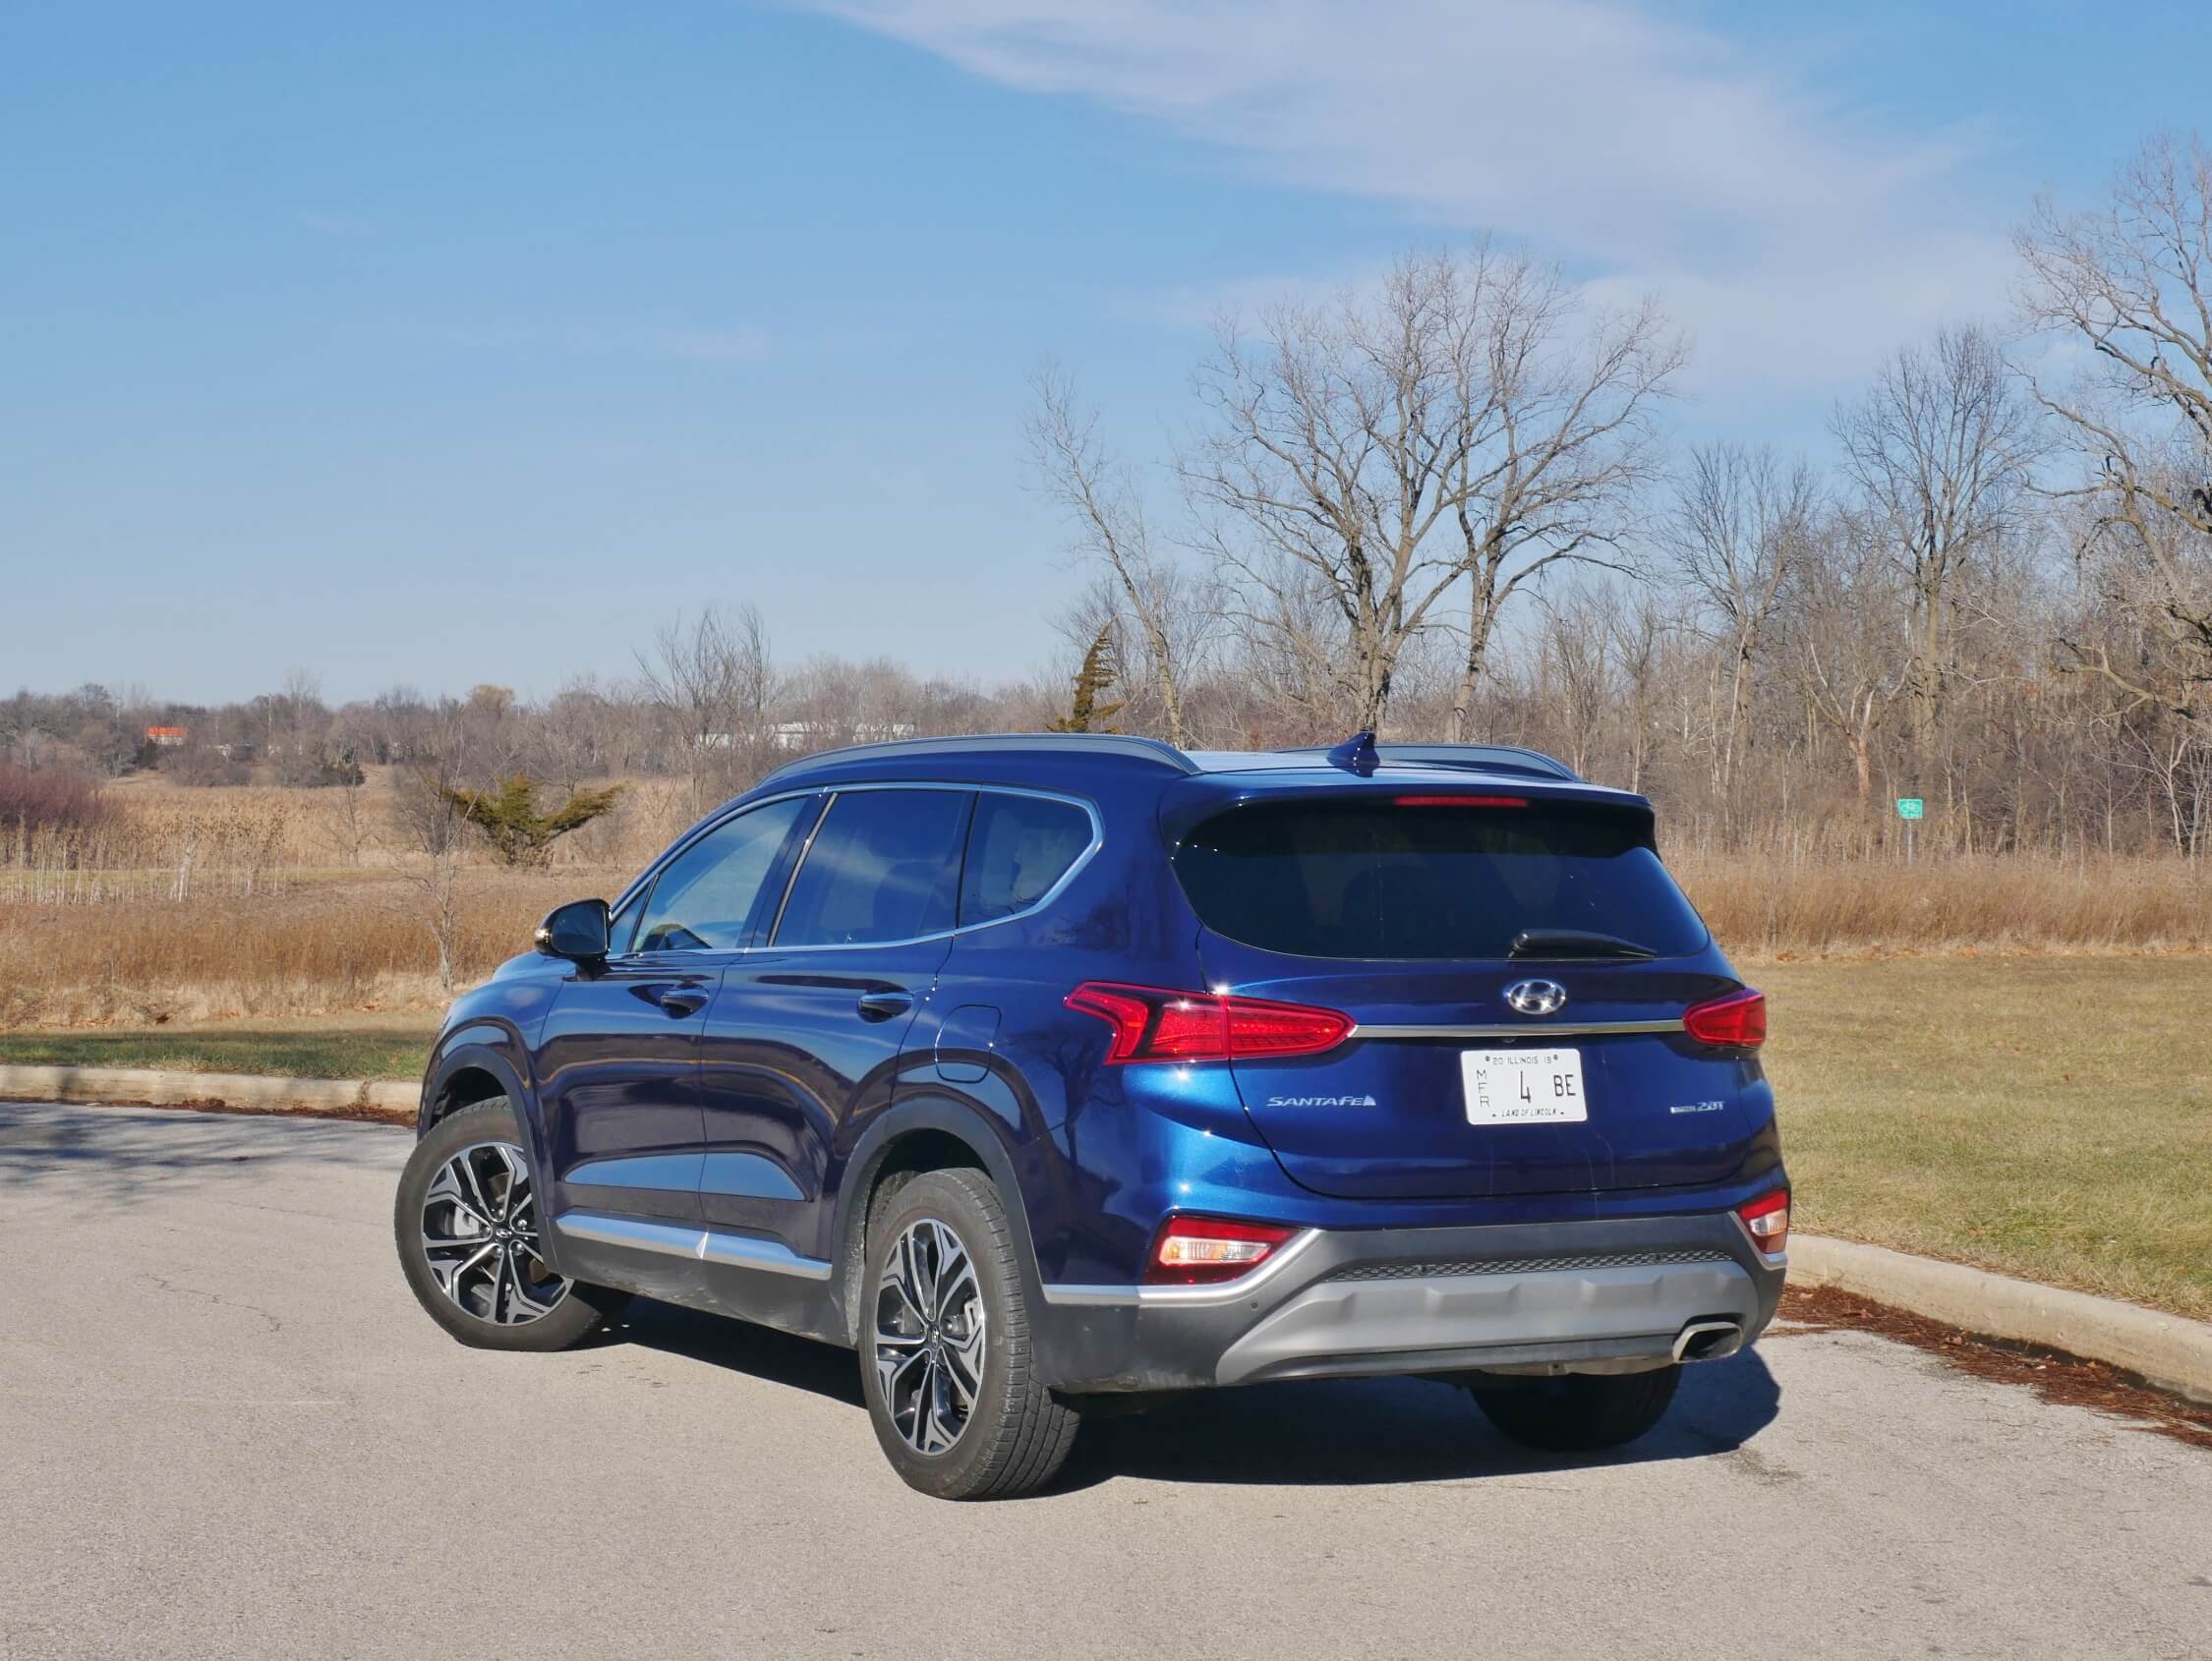 2019 Hyundai Santa Fe 2.0T Ultimate AWD: A more expressively creased silhouette and gently tiered back end is supplemented by expected lower cladding and simulated skid plates